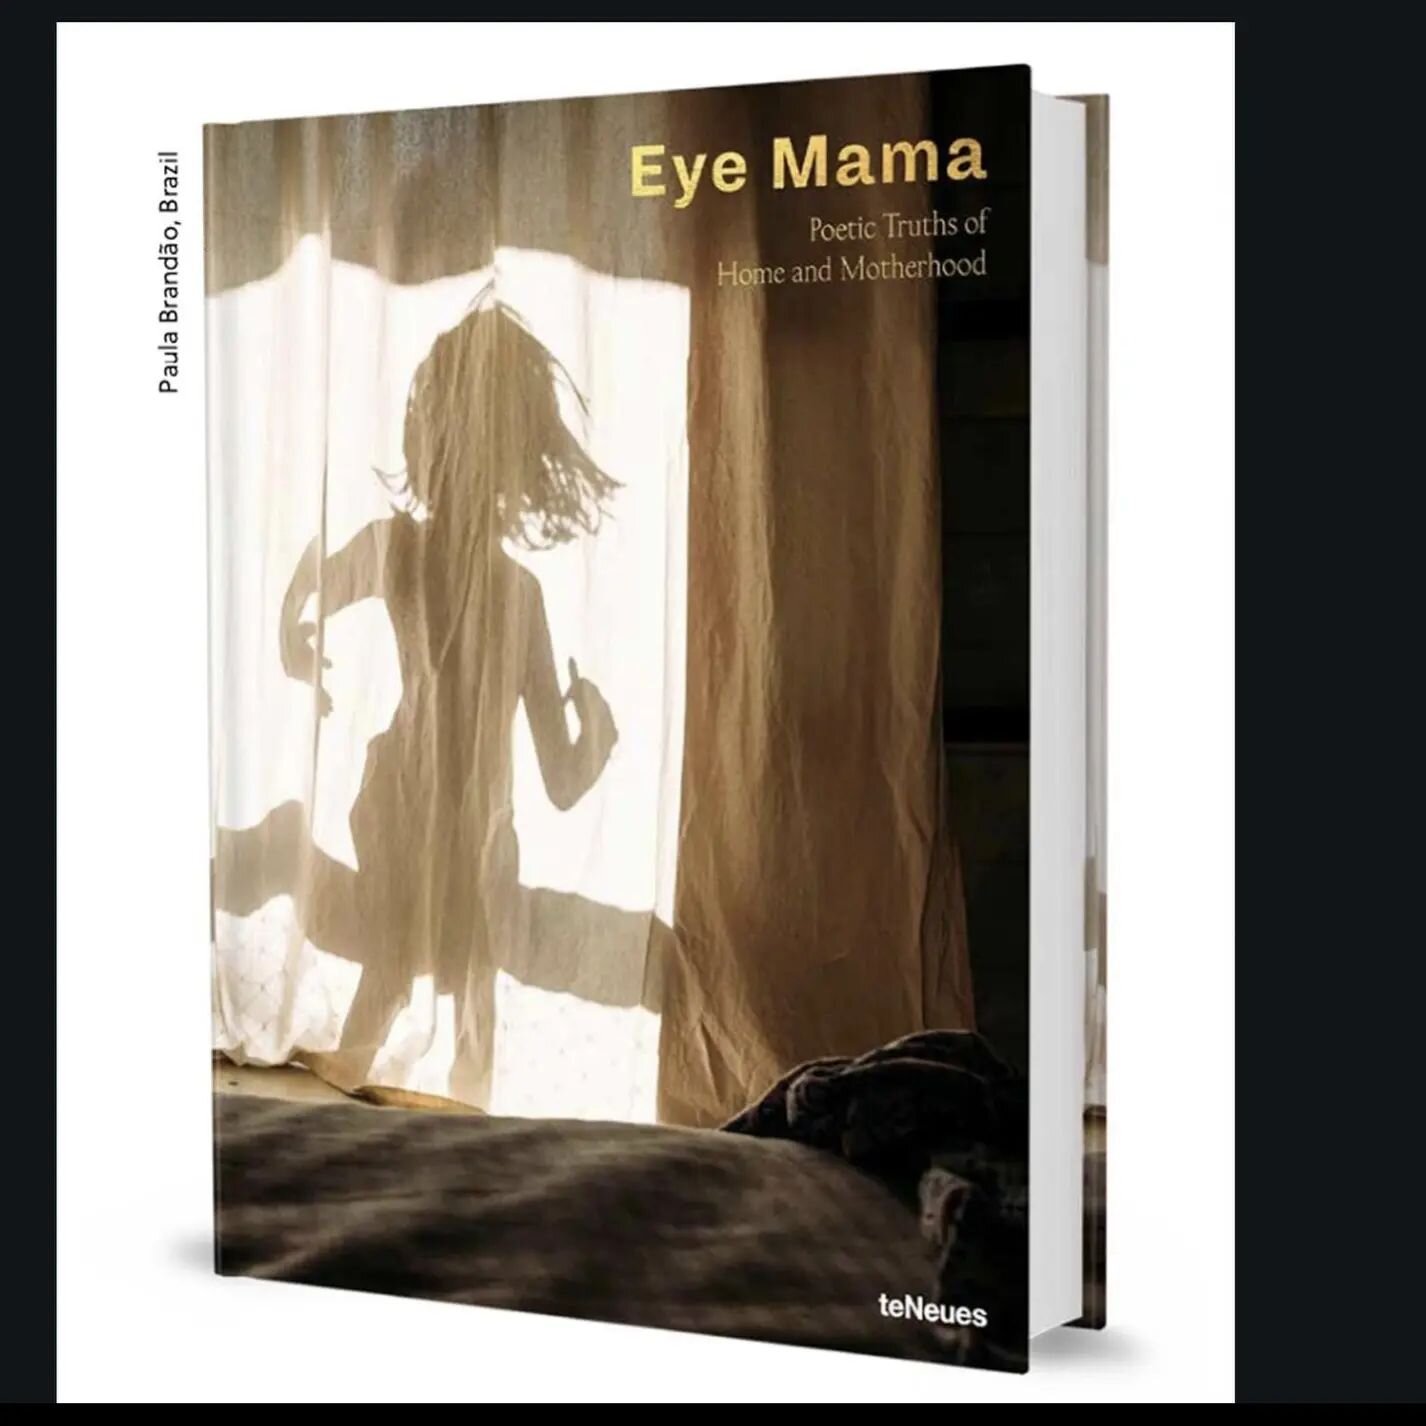 So happy to share that my image &quot;Safe Place&quot; will be included in the &quot;Eye Mama: Poetic Truths of Home and Motherhood&quot; book published by teNeues, coming out this summer! The book is available to pre-order now, link in&nbsp;bio. 

T